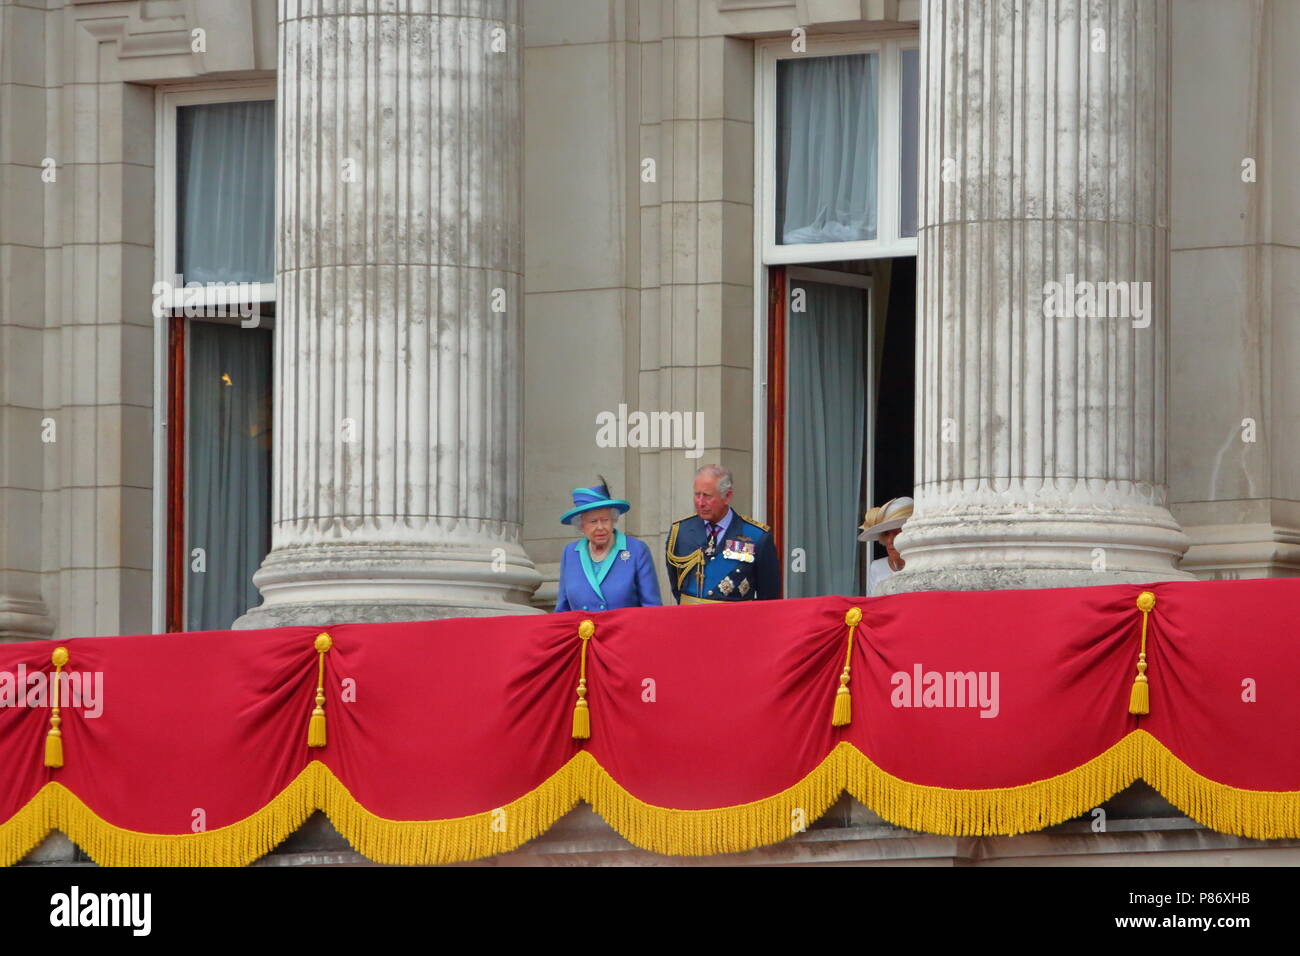 London, UK. 10th July 2018. The Queen and Prince Charles on the balcony of Buckingham Palace. Credit: Uwe Deffner/Alamy Live News Stock Photo